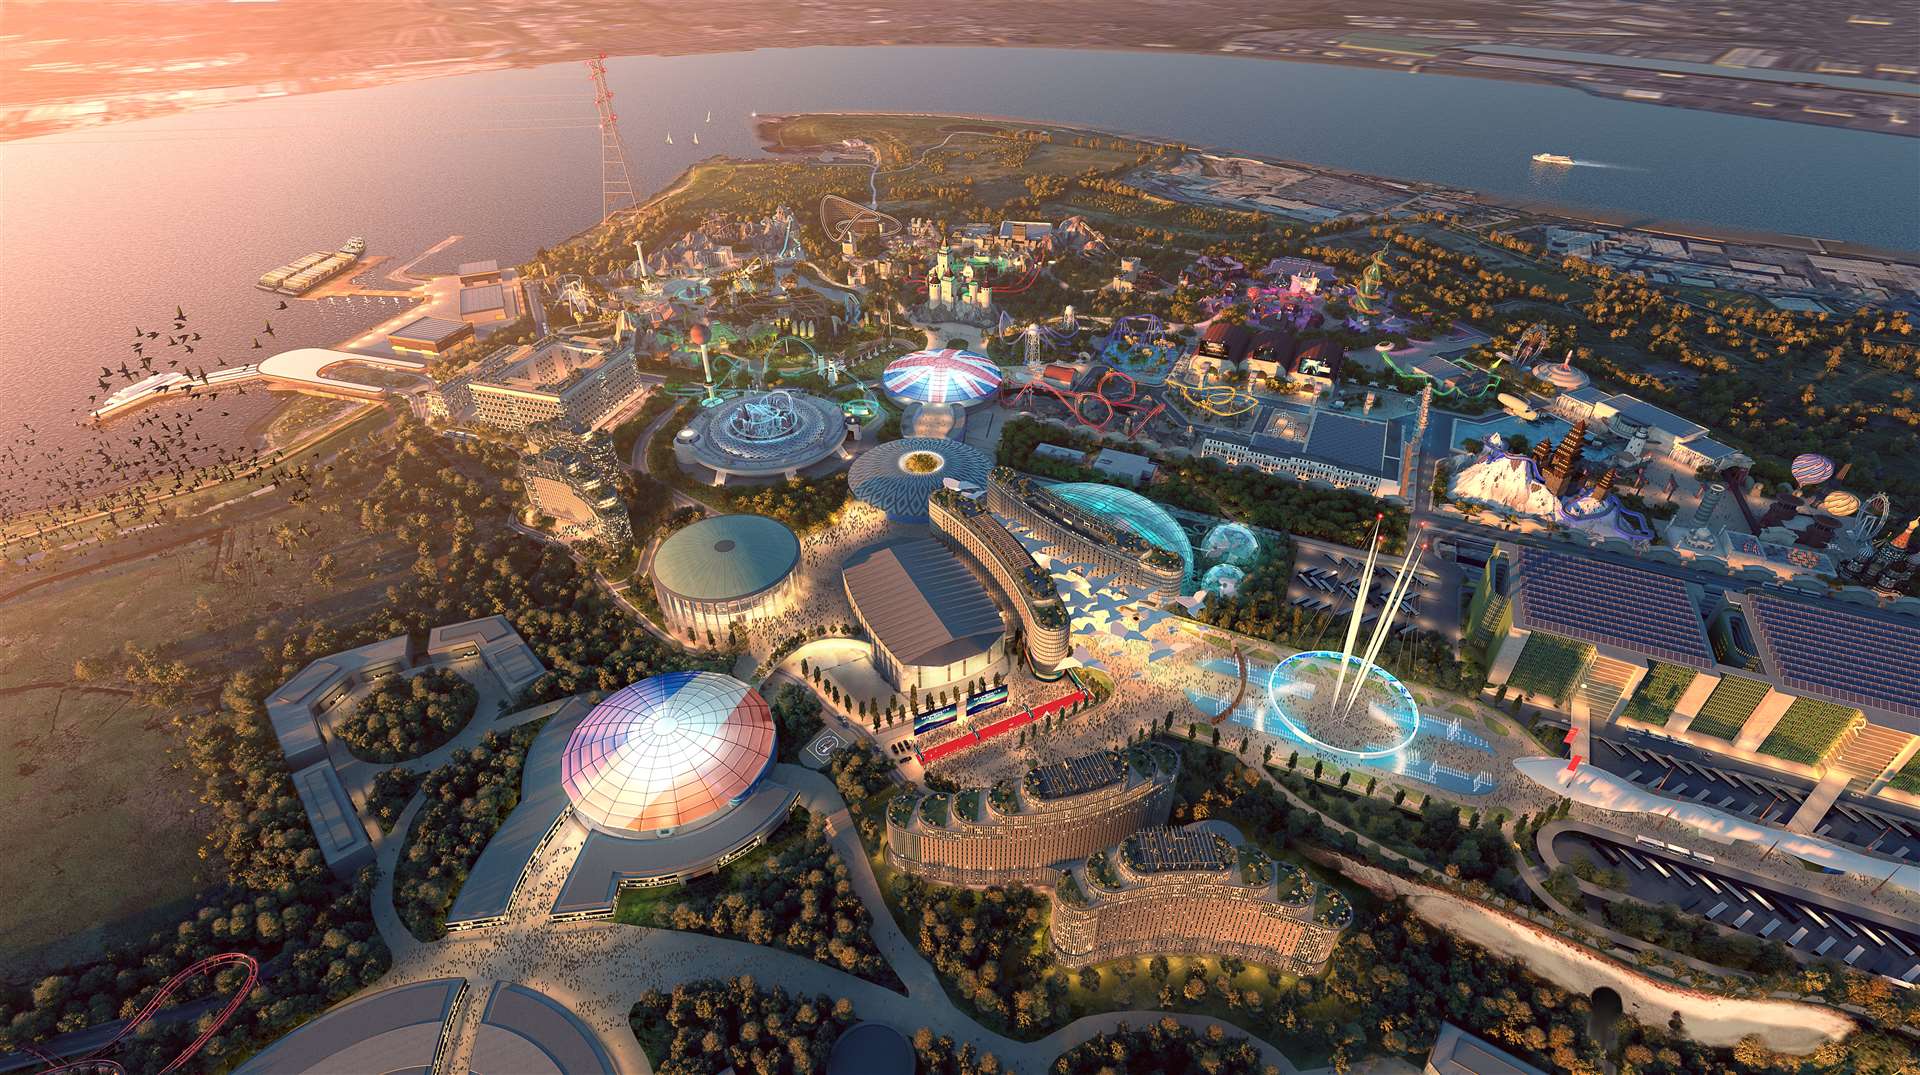 What the London Resort theme park will look like